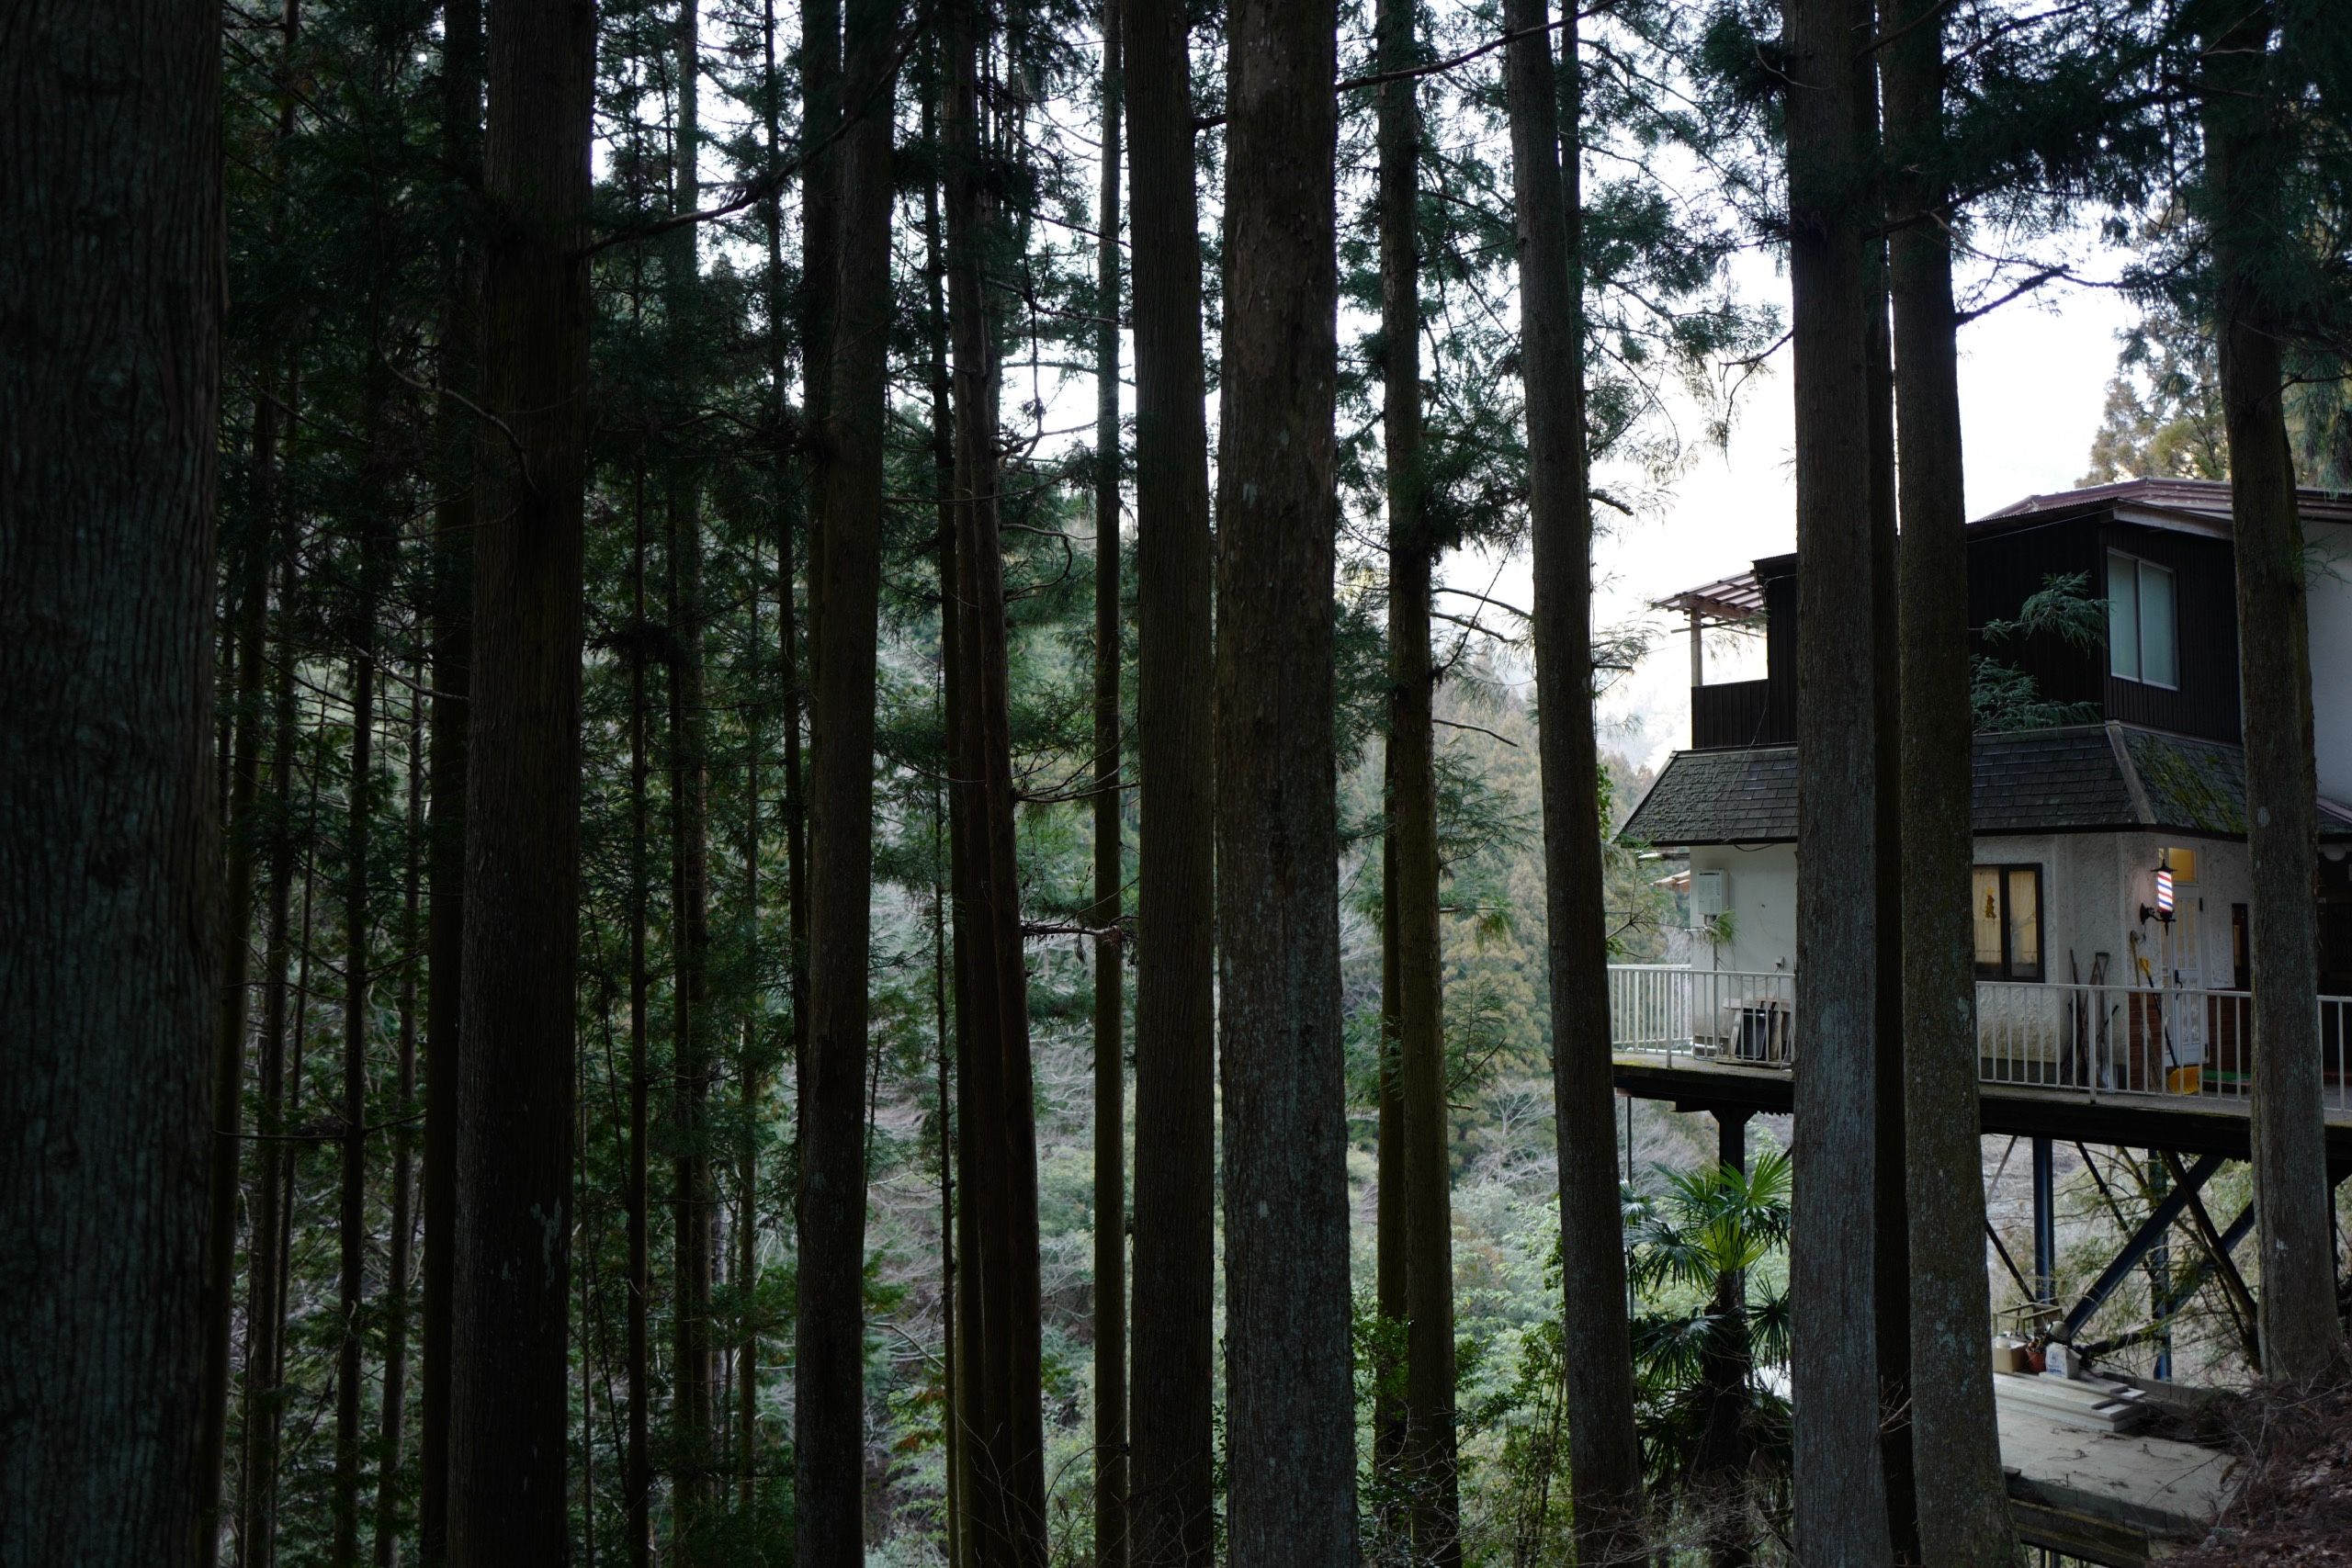 A house raised on stilts stands in a steep forest of vertical trunks.